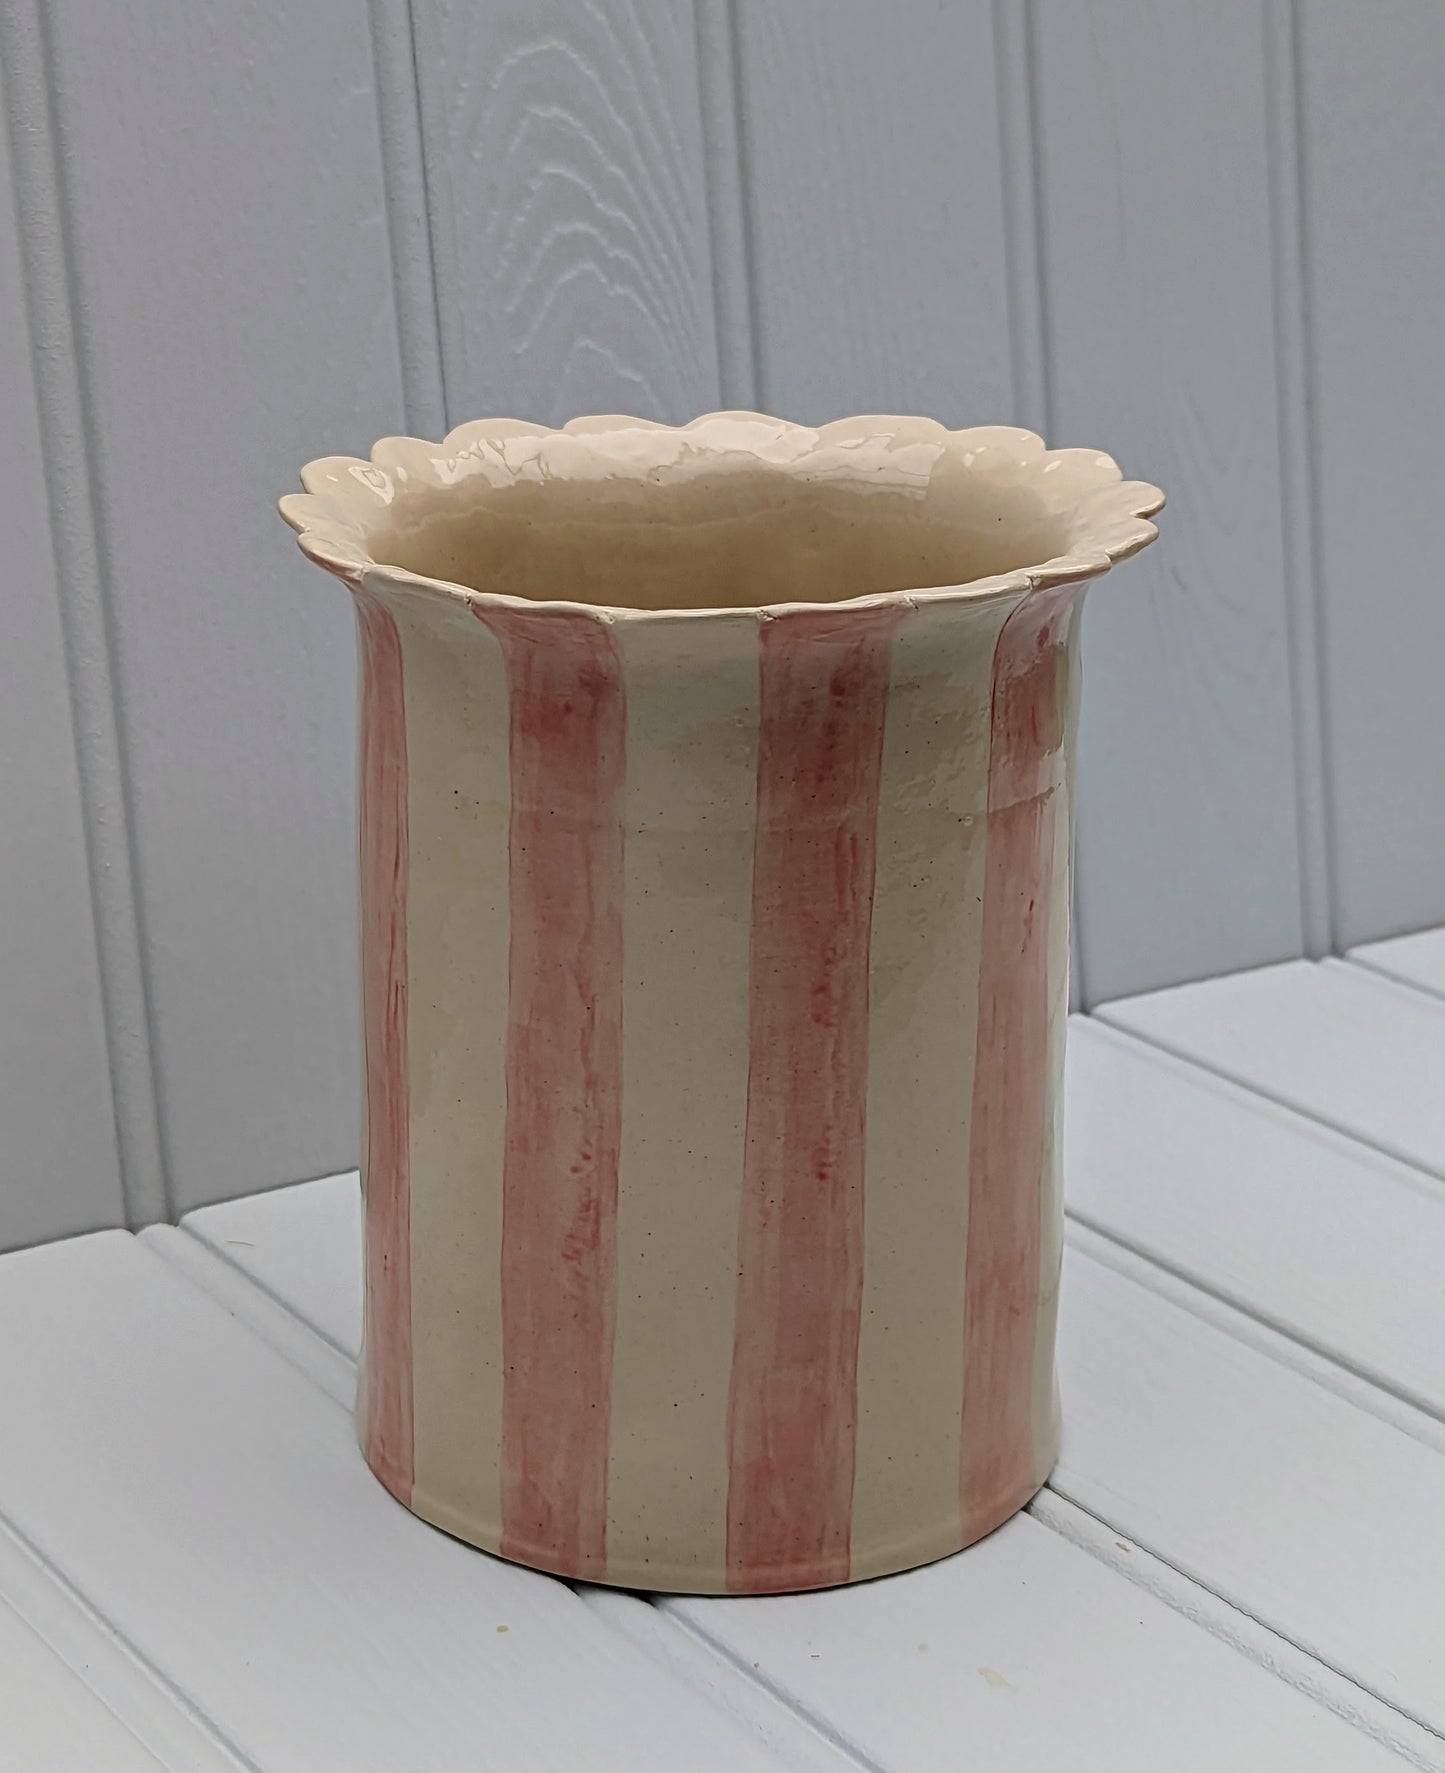 Sea Bramble Ceramics - Handmade, Extra-large, Stoneware vase from their Daisy vase range. Front view shown with pink stripes and a scalloped top, this vase is ideal for fuller, larger flower arrangements.